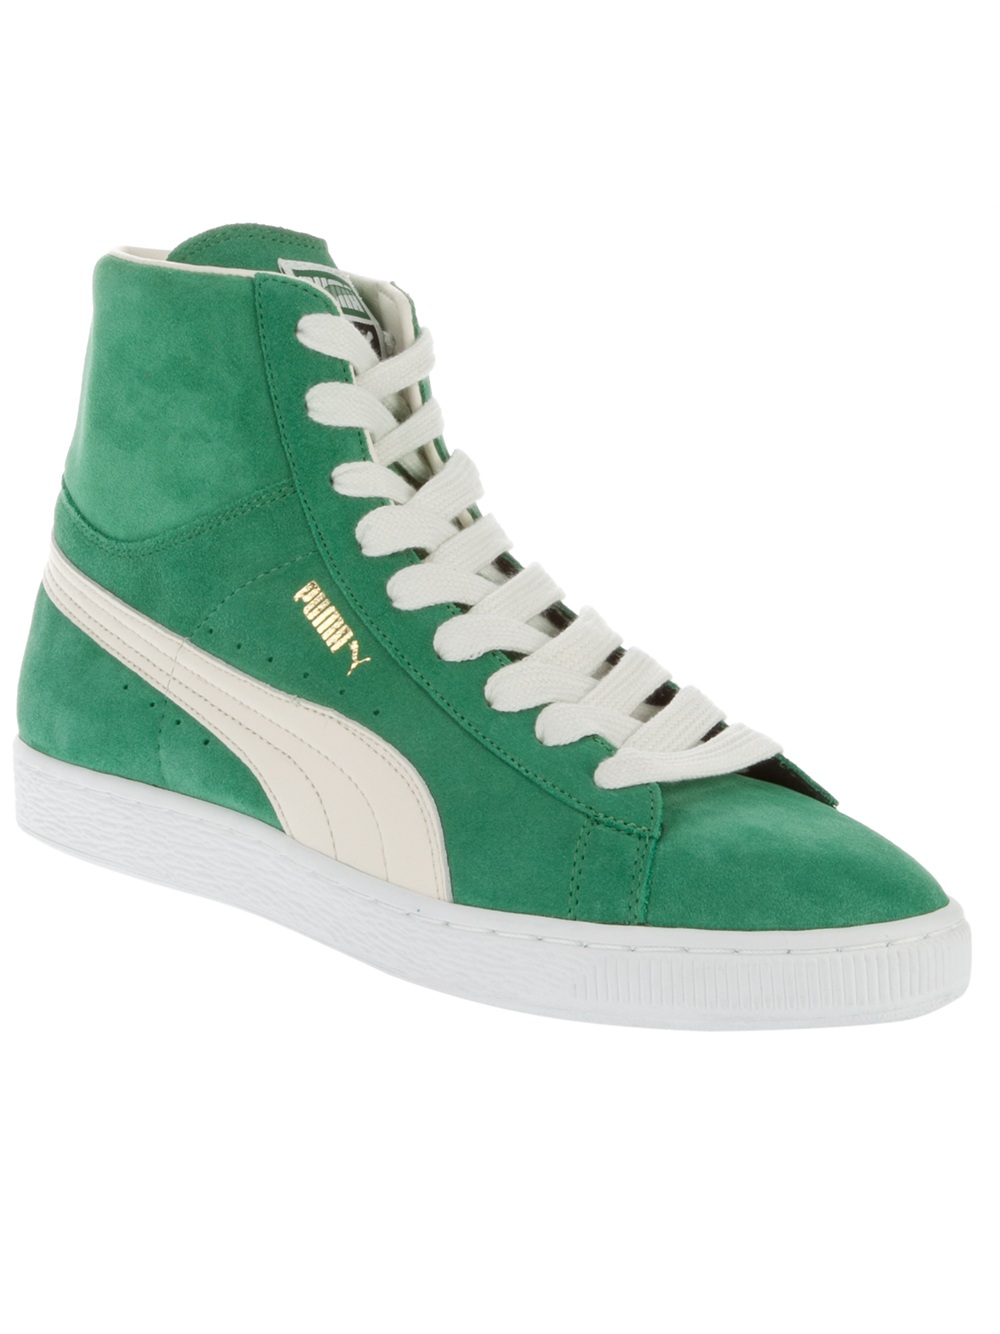 Lyst - Puma Suede Mid Top Sneakers in Green for Men